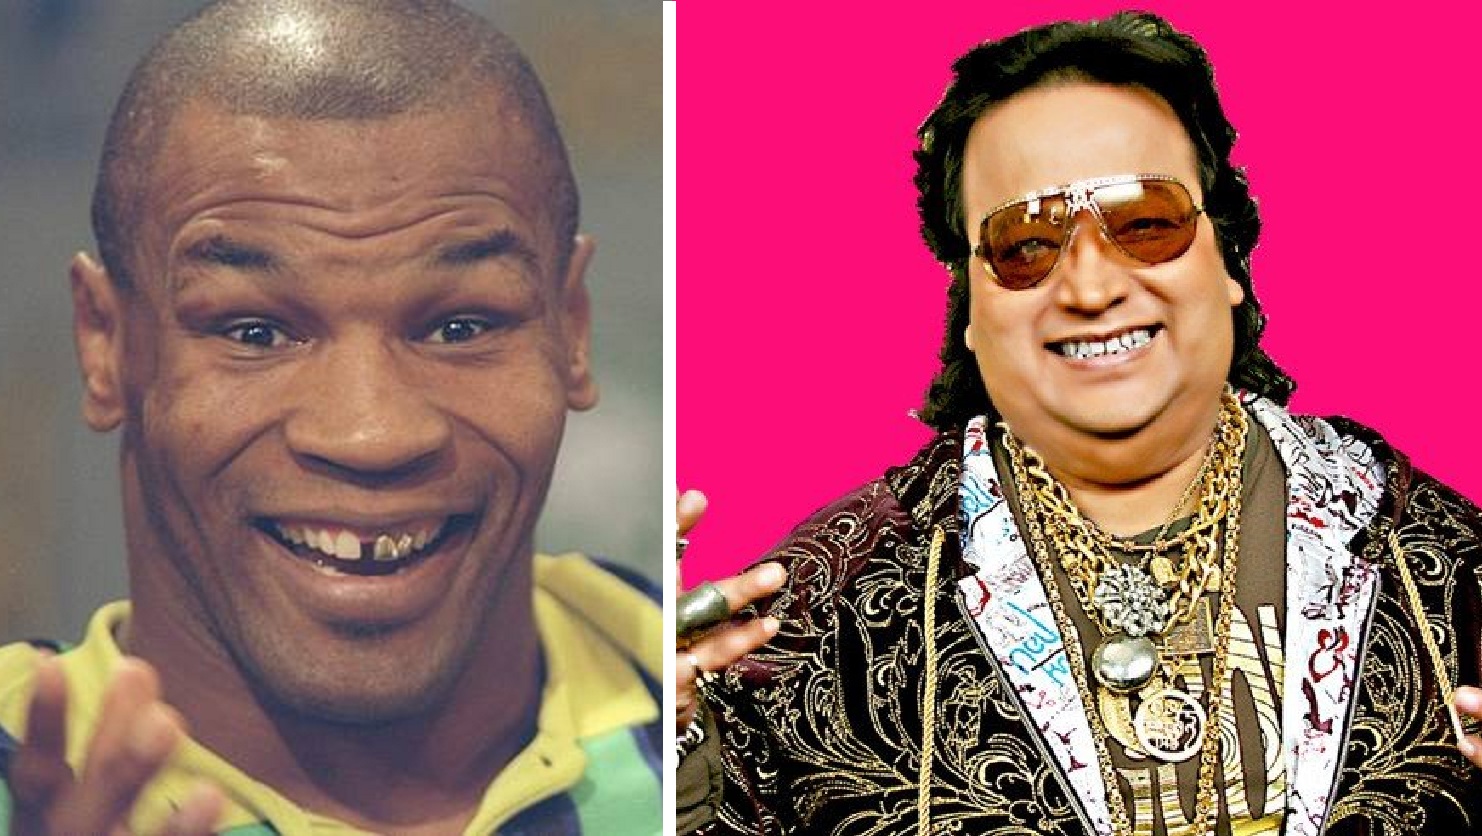 Bappi Lahiri has composed a peppy-disco song, “especially” to welcome Mike Tyson in India!